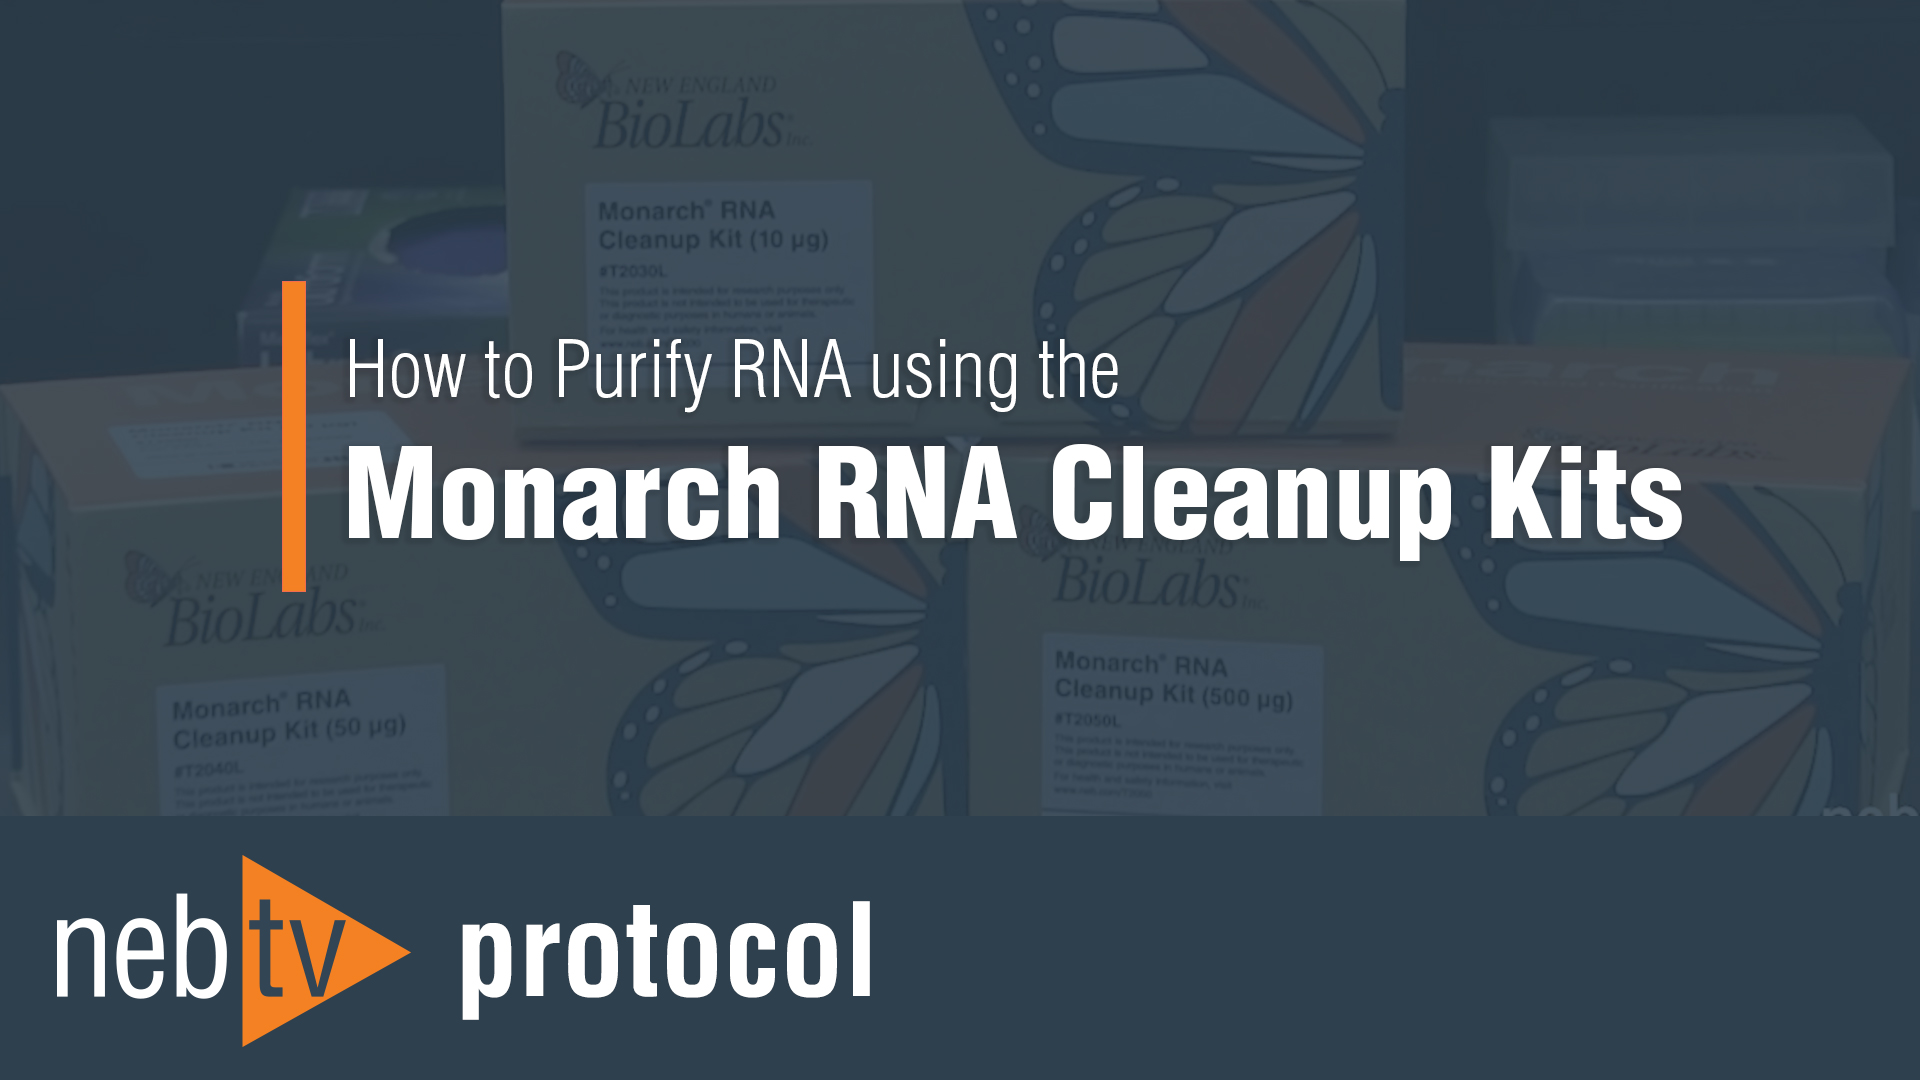 Monarch® RNA Cleanup Kit (500 µg) |